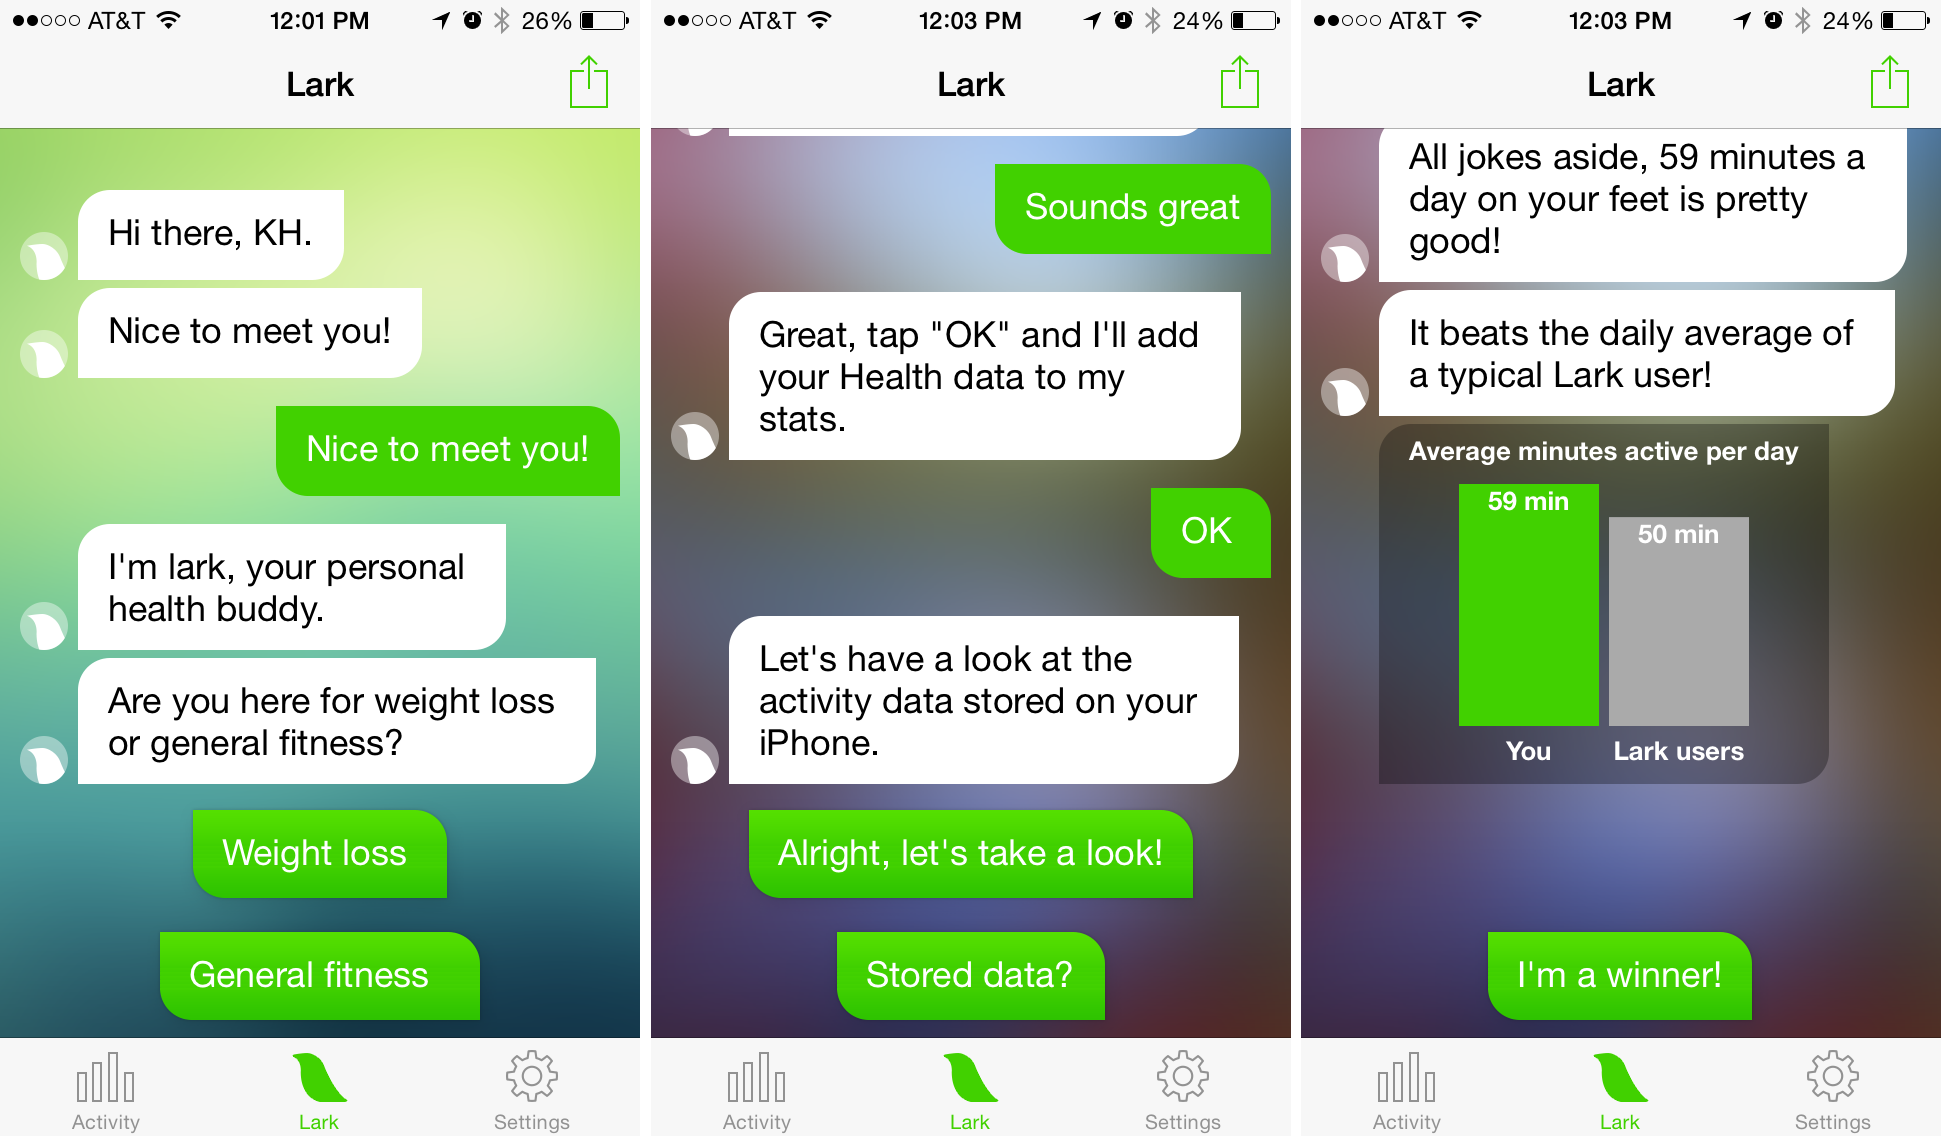 Lark is a personal health coach. It combines explicit and implicit learning via a chat-like interface. It asks the user explicitly about their fitness goals, then asks for permission to access their phone’s motion data history, which allows it to implicitly determine the user’s current activity level and provide relevant coaching.